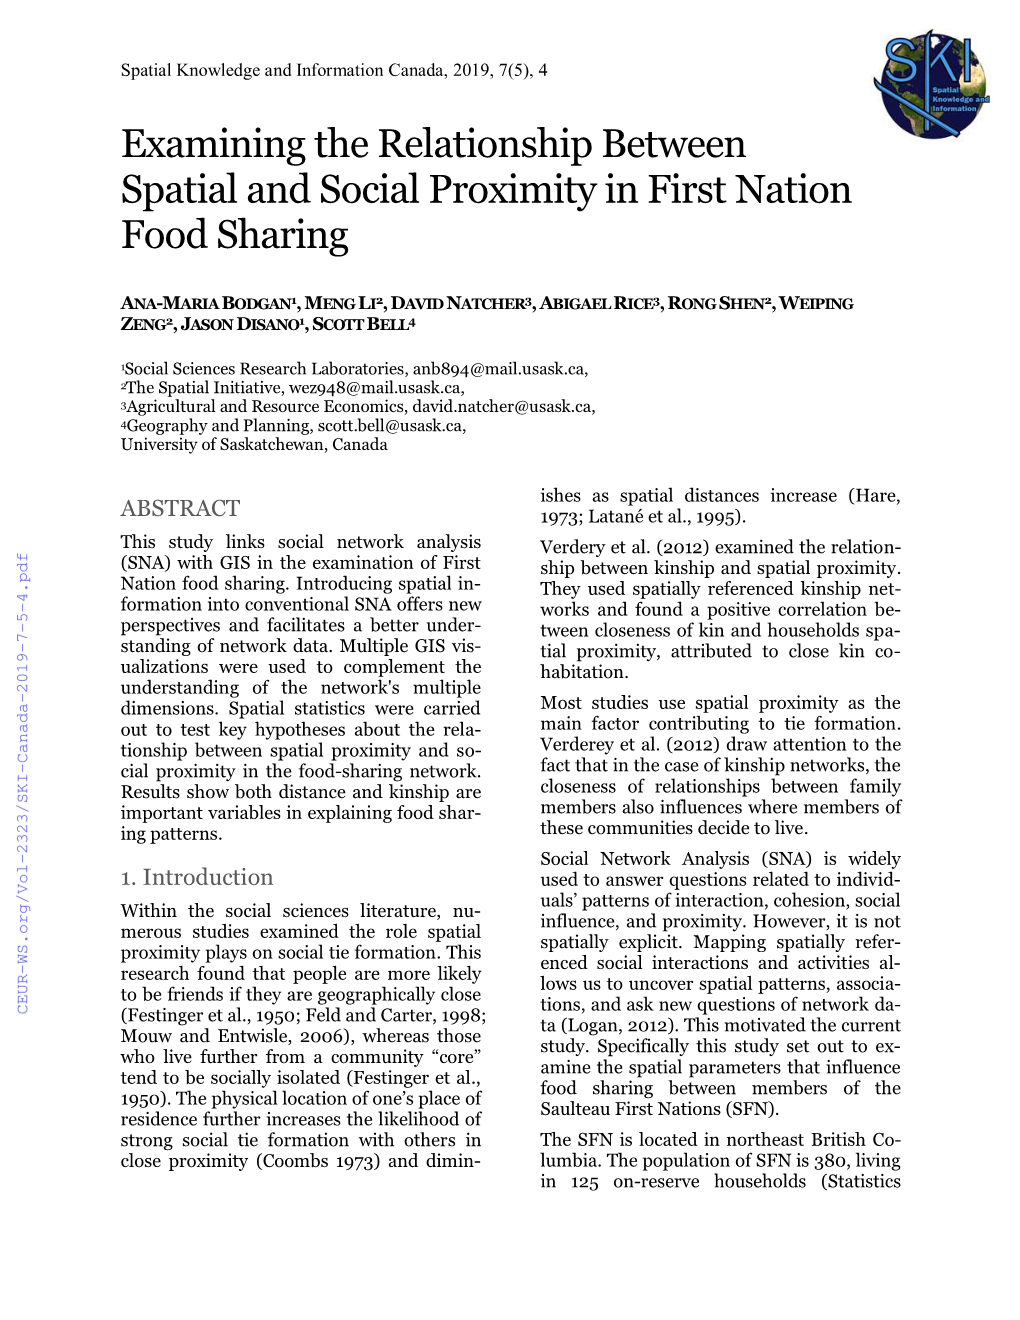 Examining the Relationship Between Spatial and Social Proximity in First Nation Food Sharing